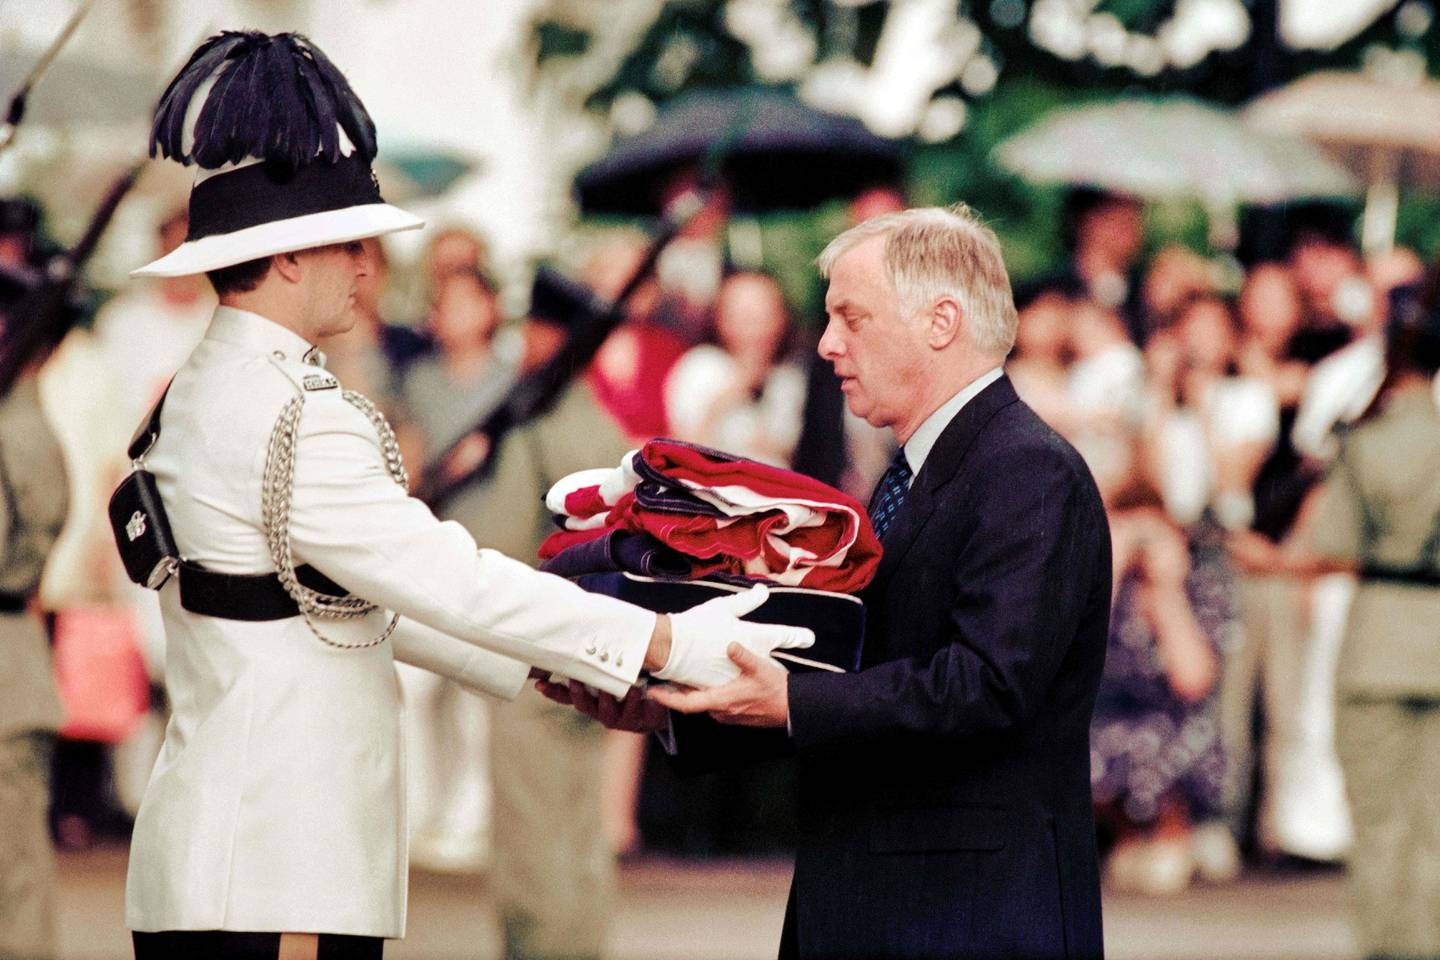 Chris Patten, the last governor of colonial Hong Kong, receives the Union Jack flag after it was lowered for the last time at Government House during a farewell ceremony in Hong Kong on July 1, 1997. AFP